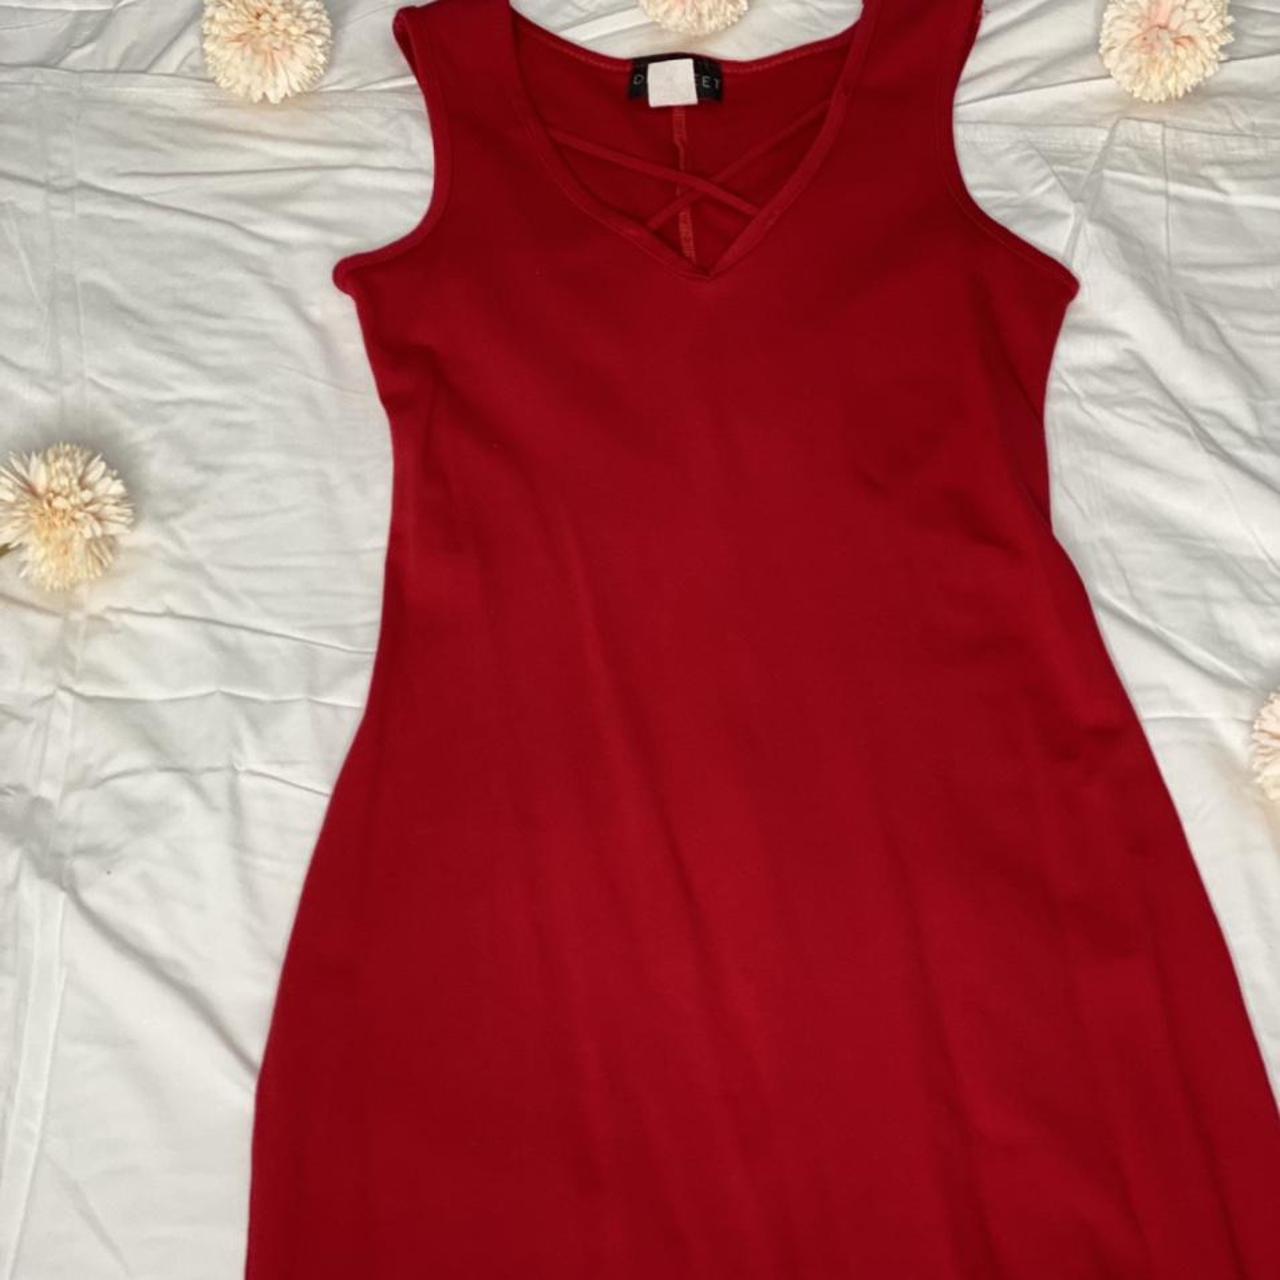 Product Image 1 - Dress
Worn once 
Excellent conditions